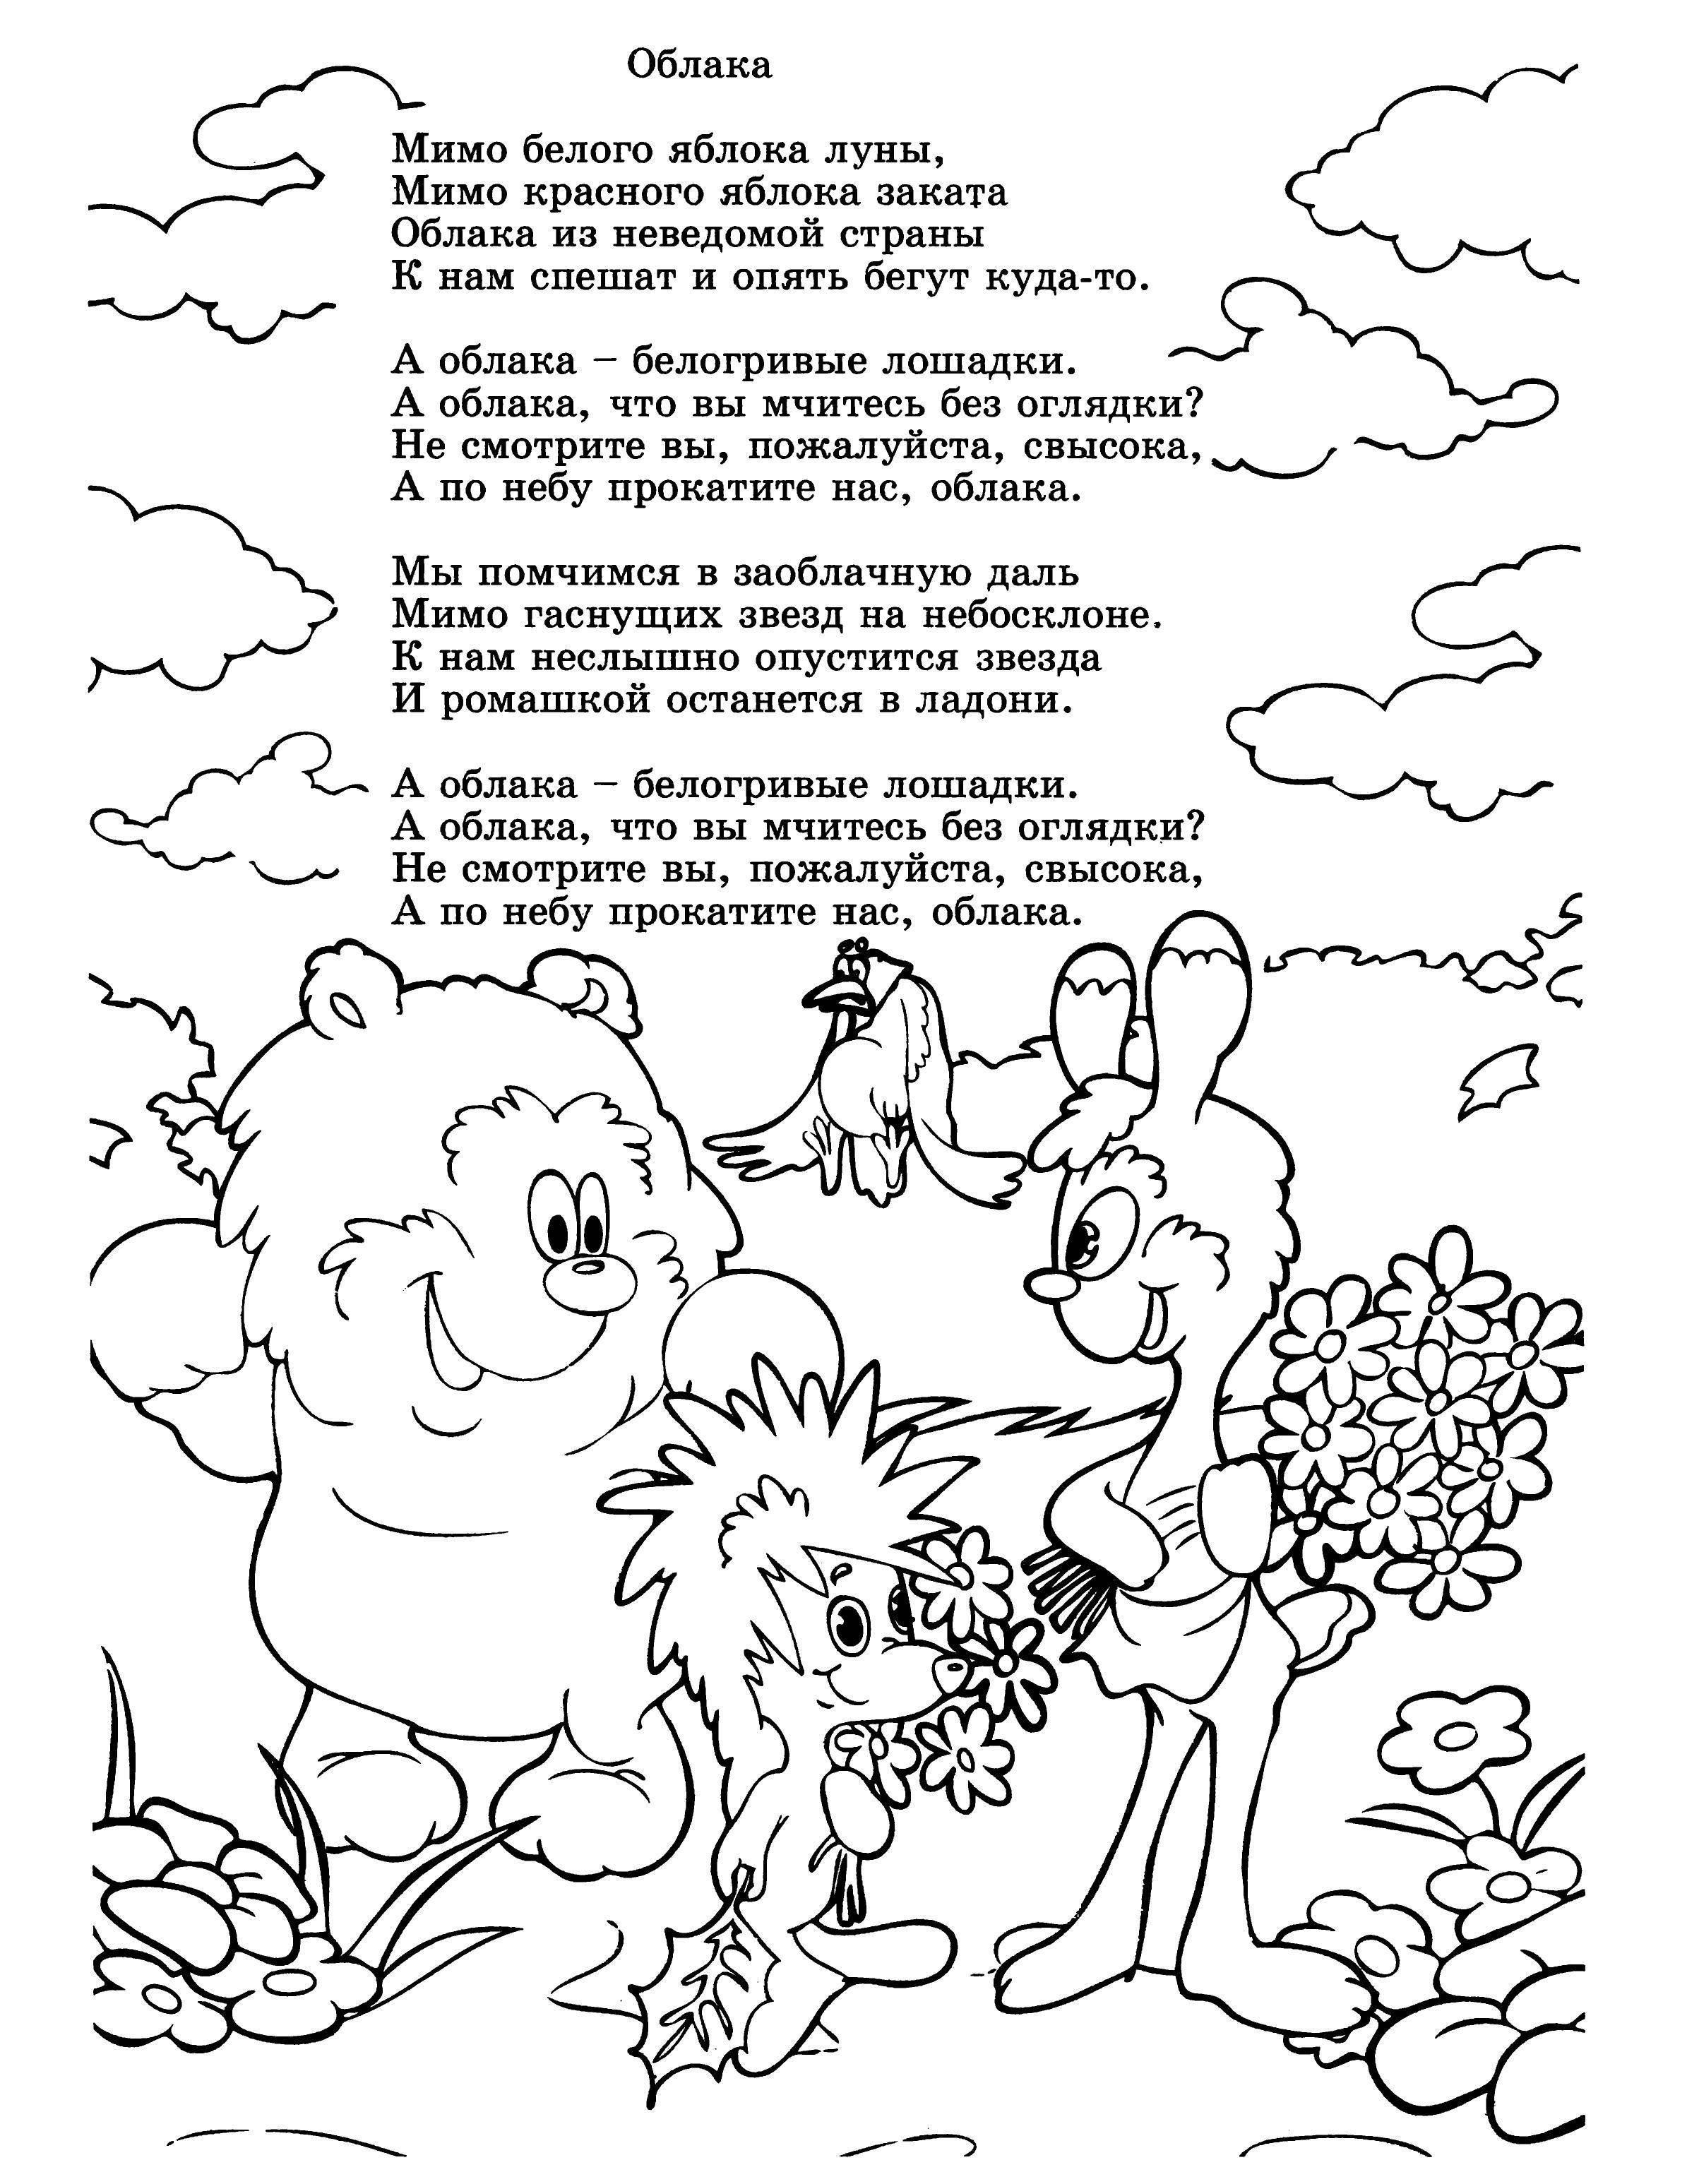 Coloring Song of the cloud . Category Poems. Tags:  Verse, song.